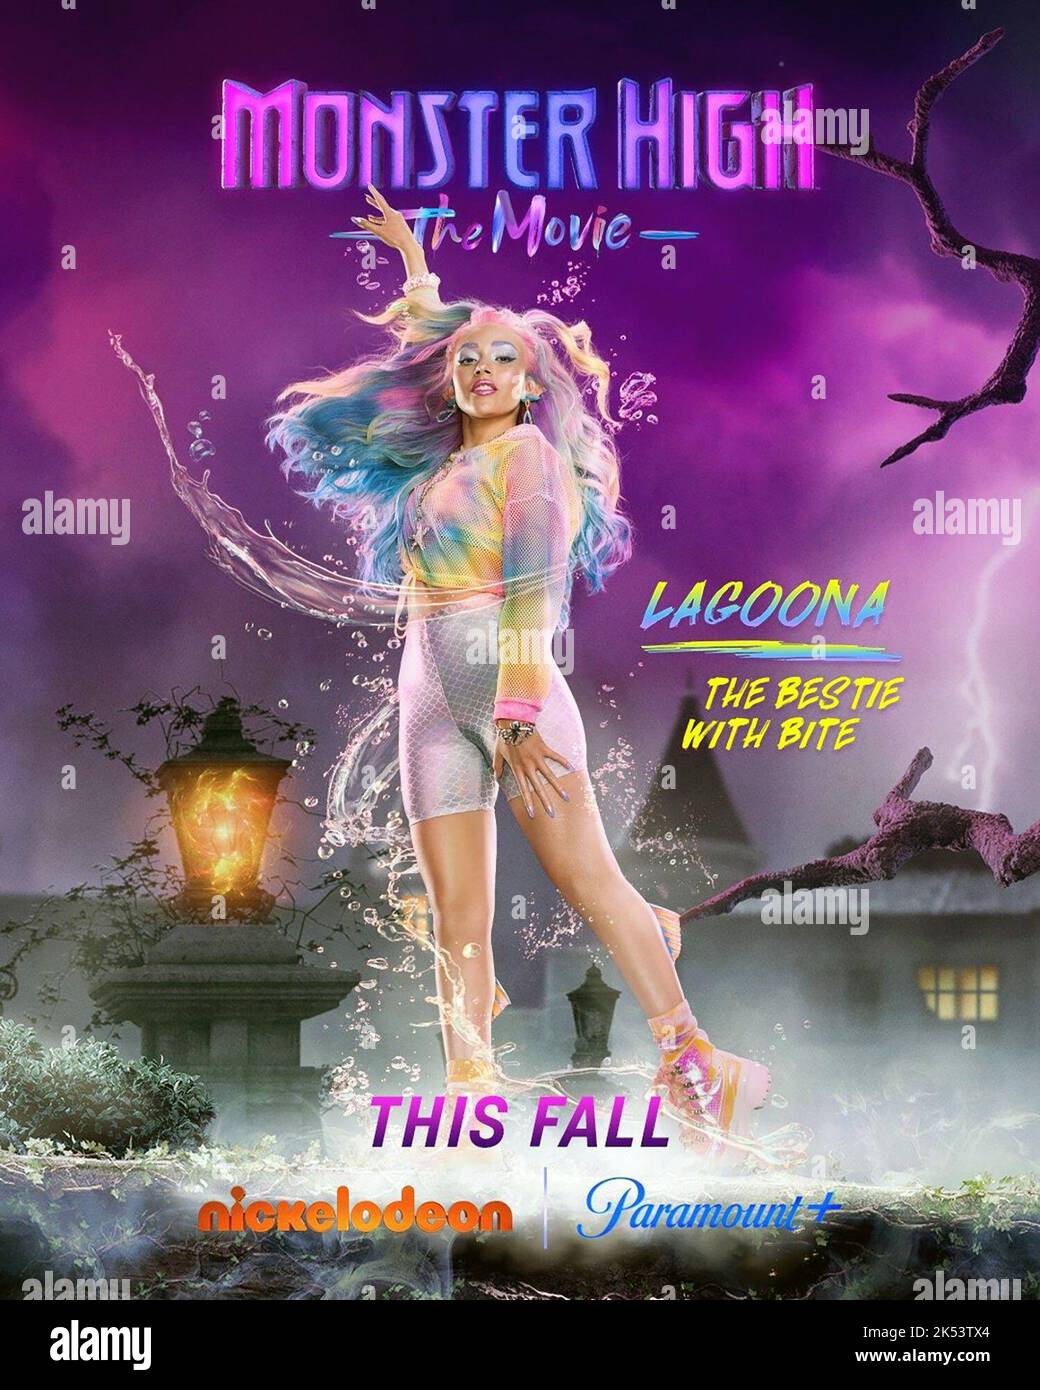 MONSTER HIGH: THE FILM, (alias MONSTER HIGH), affiche de personnage  américain, Lina Lecompte, 2022. © Paramount+ / Courtesy Everett Collection  Photo Stock - Alamy